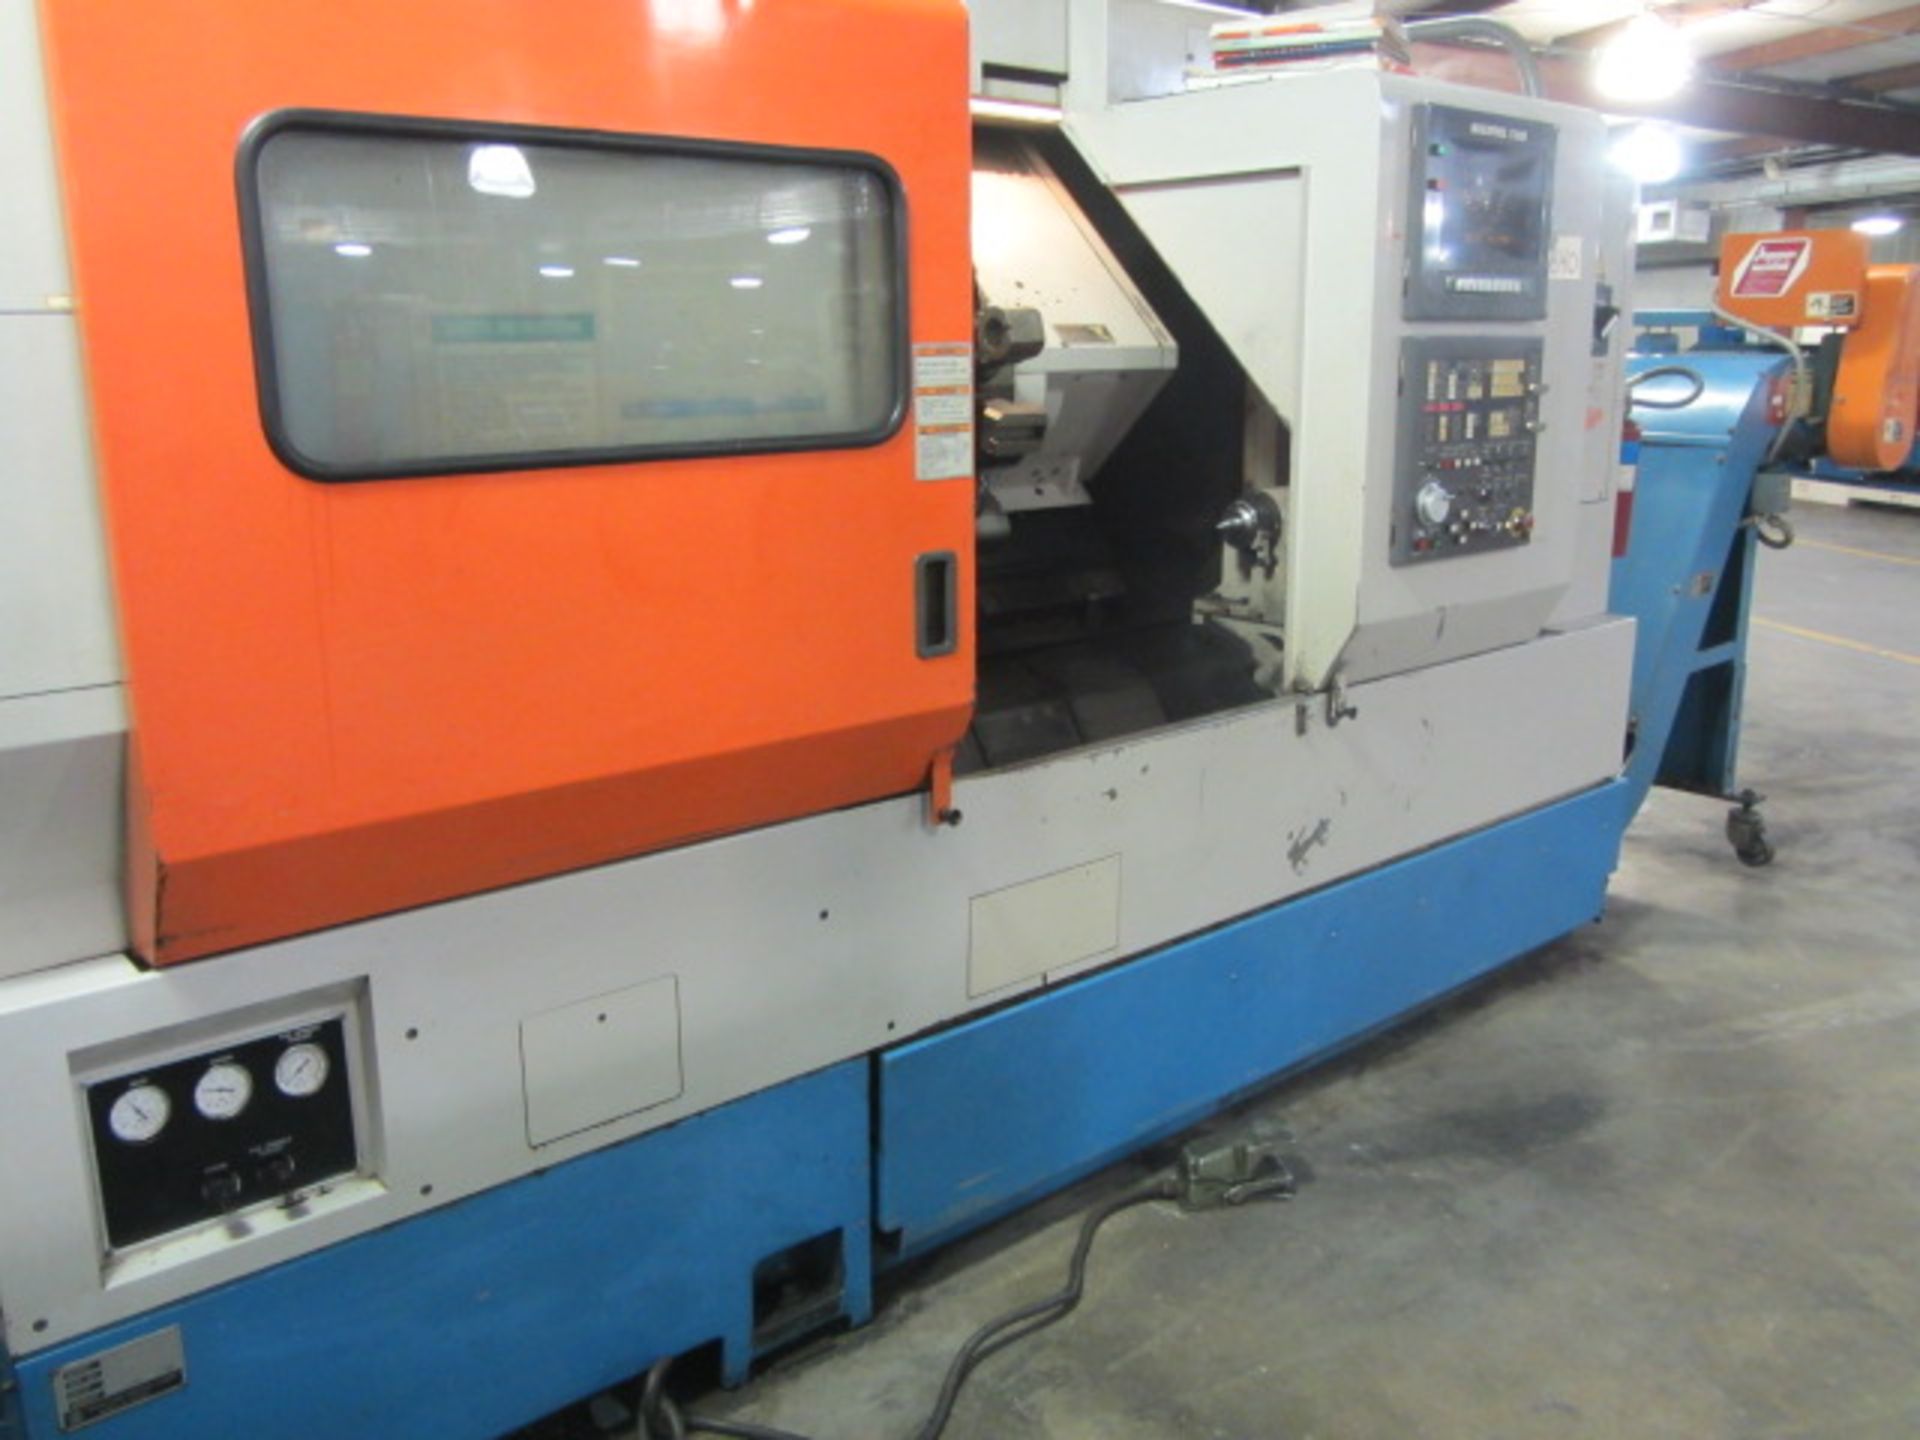 Mazak Model Super Quick Turn 28 2-Axis CNC Turning Center with 20.08'' Swing Over Bed x 40'' - Image 6 of 7